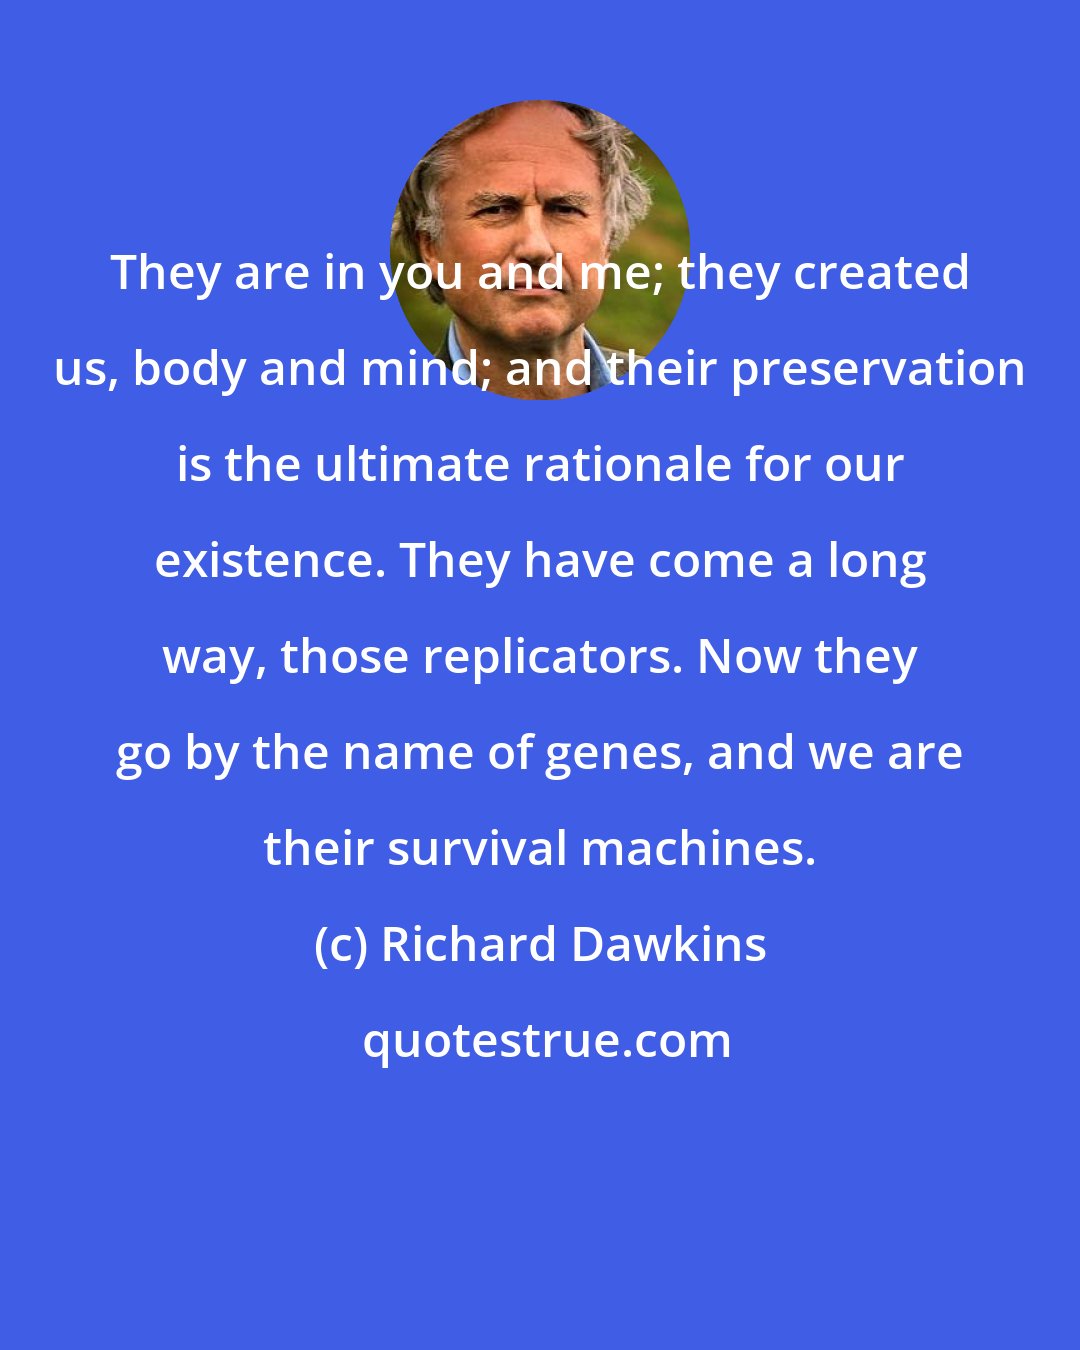 Richard Dawkins: They are in you and me; they created us, body and mind; and their preservation is the ultimate rationale for our existence. They have come a long way, those replicators. Now they go by the name of genes, and we are their survival machines.